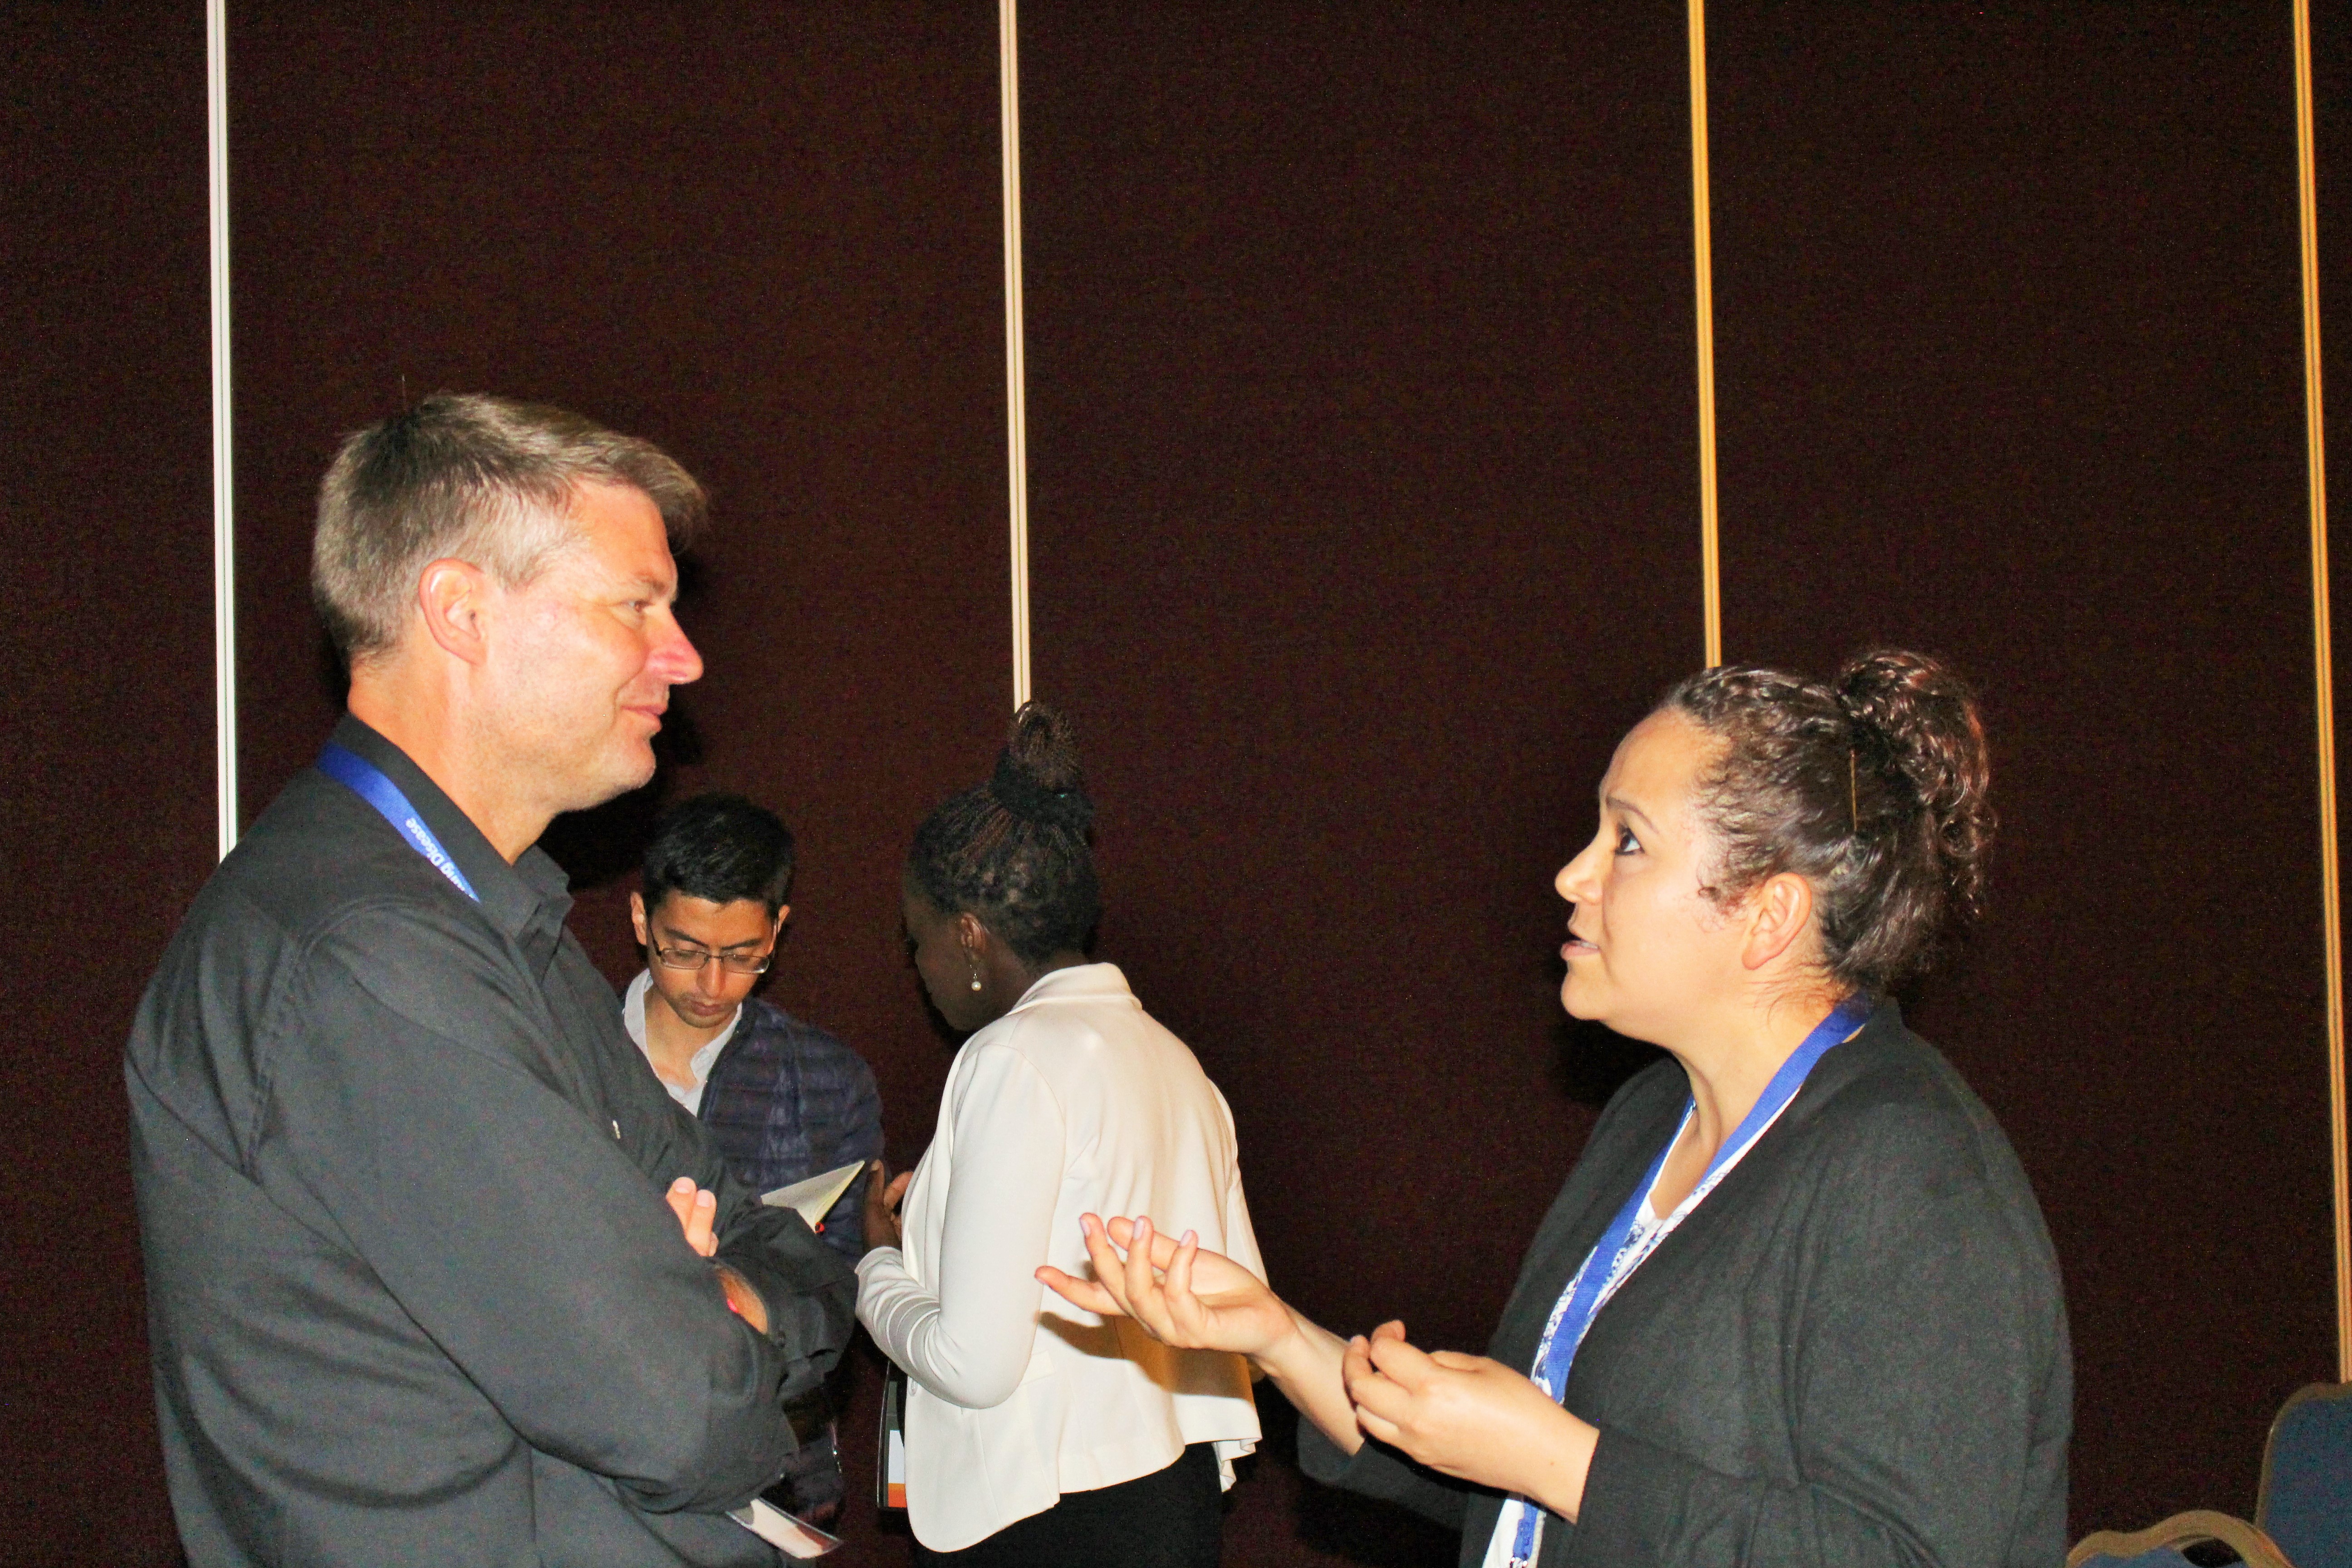 Schnoor (left) talking to Carolina Mijares about doctoral opportunities in Germany